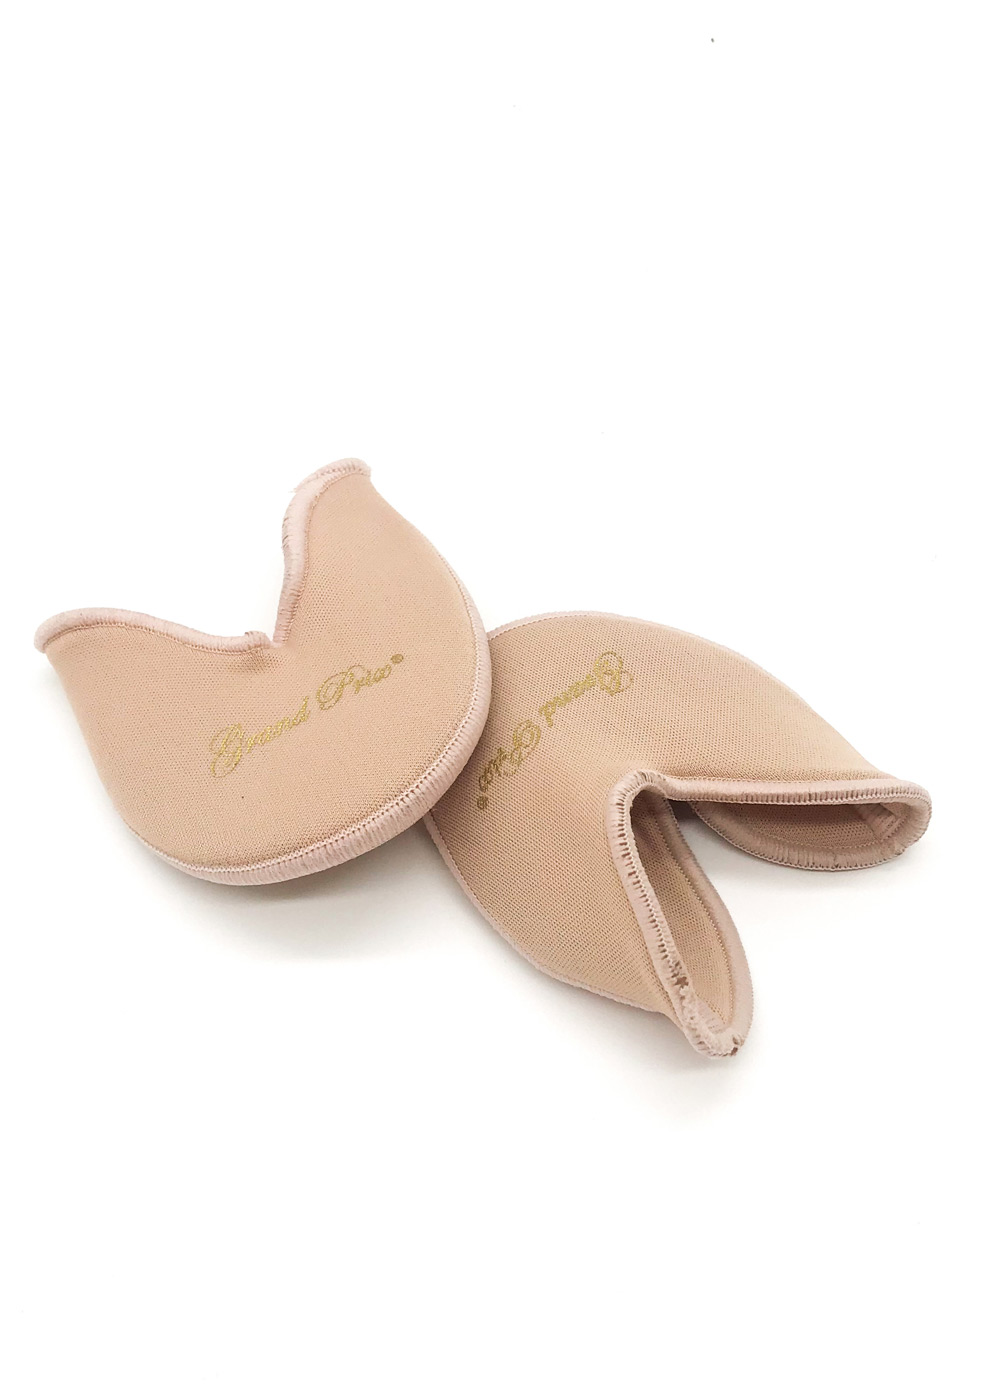 Gel inlays for pointe shoes Grand Prix moon shape 